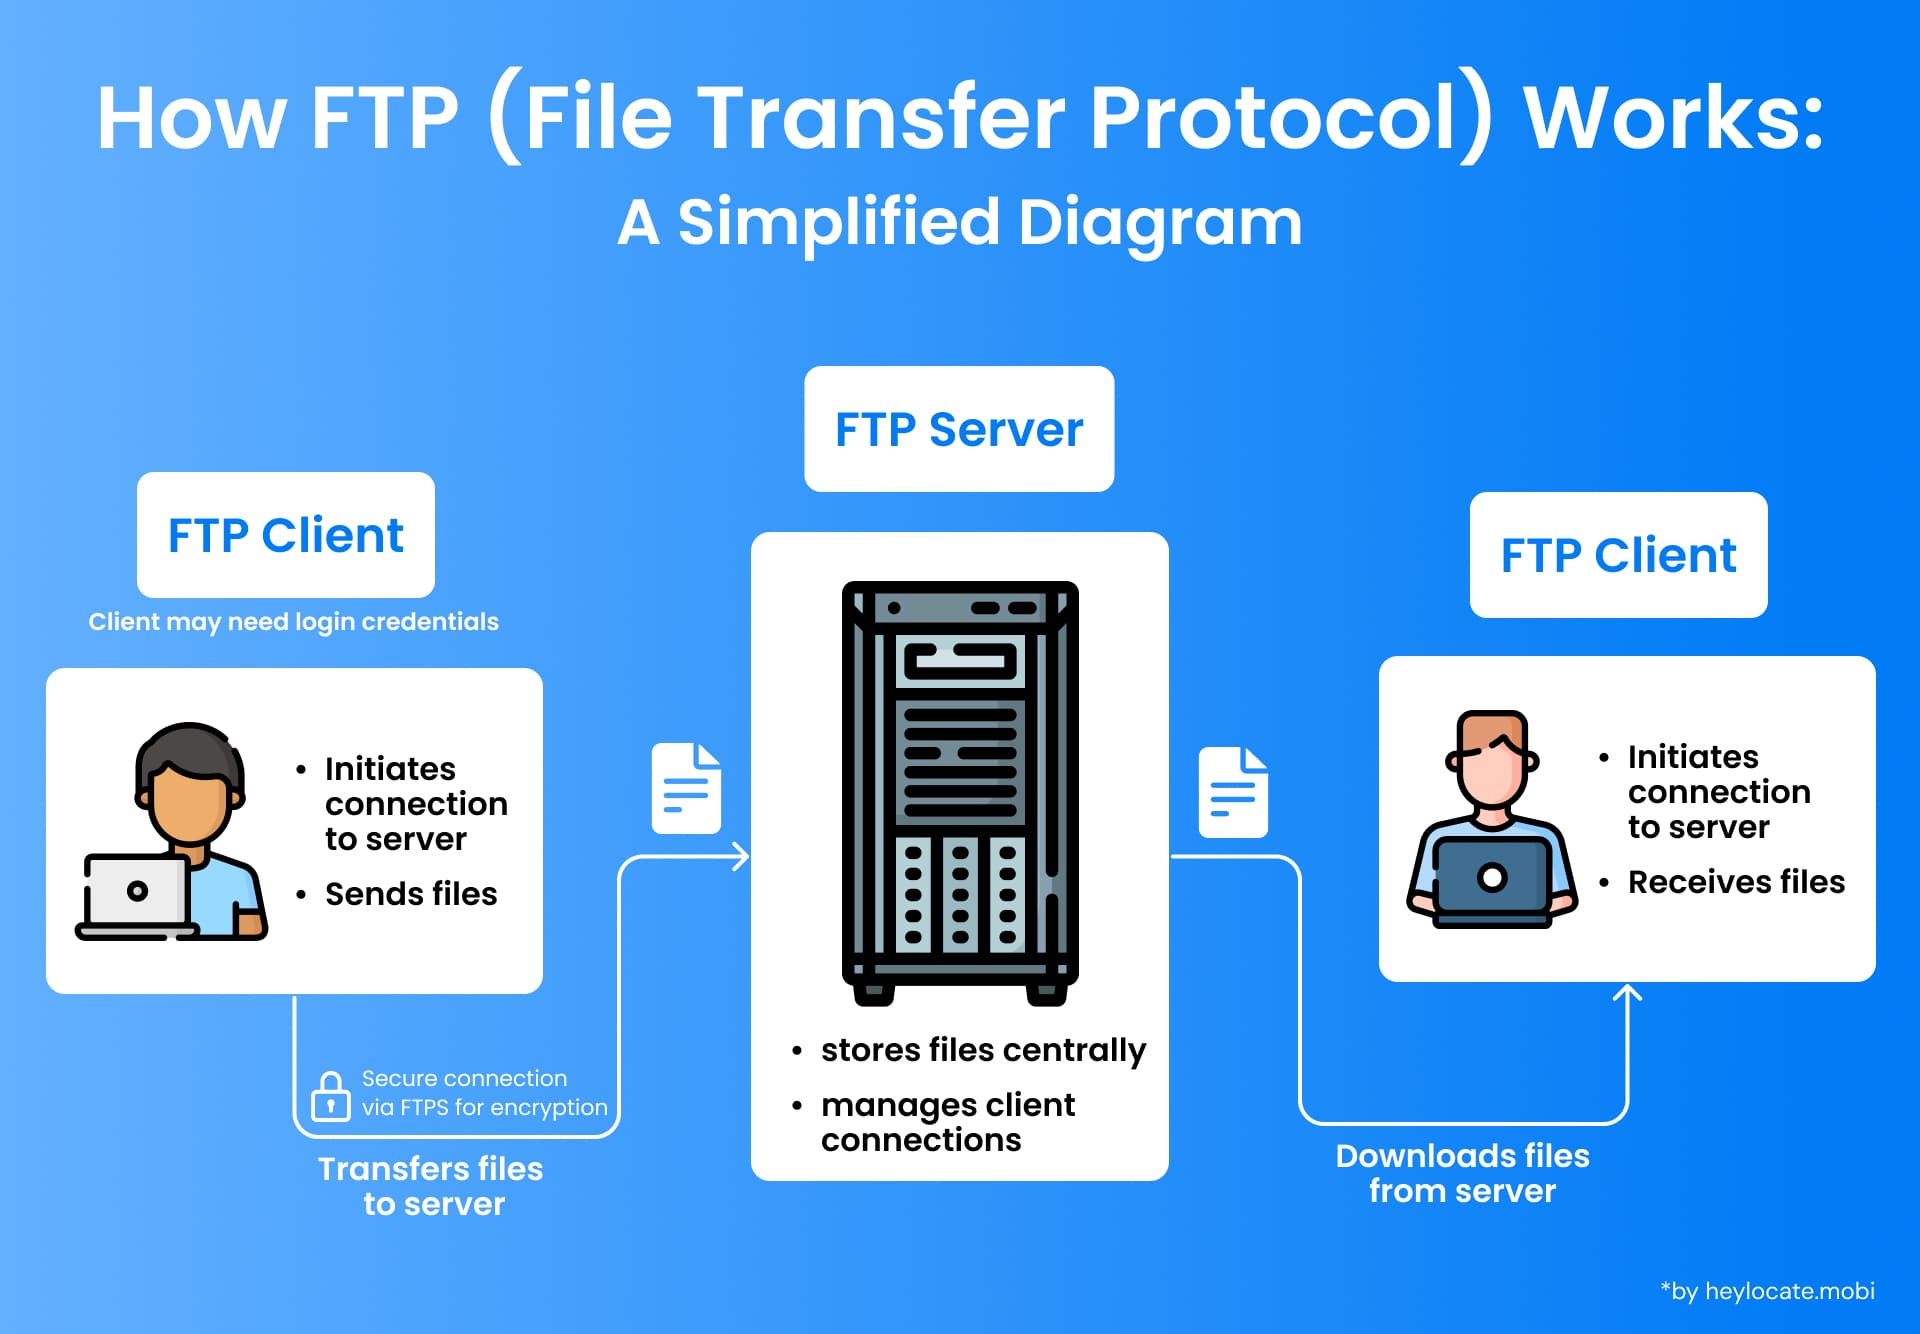 An illustration of how FTP works, showing how an FTP client sends files through a central FTP server and another FTP client receives them